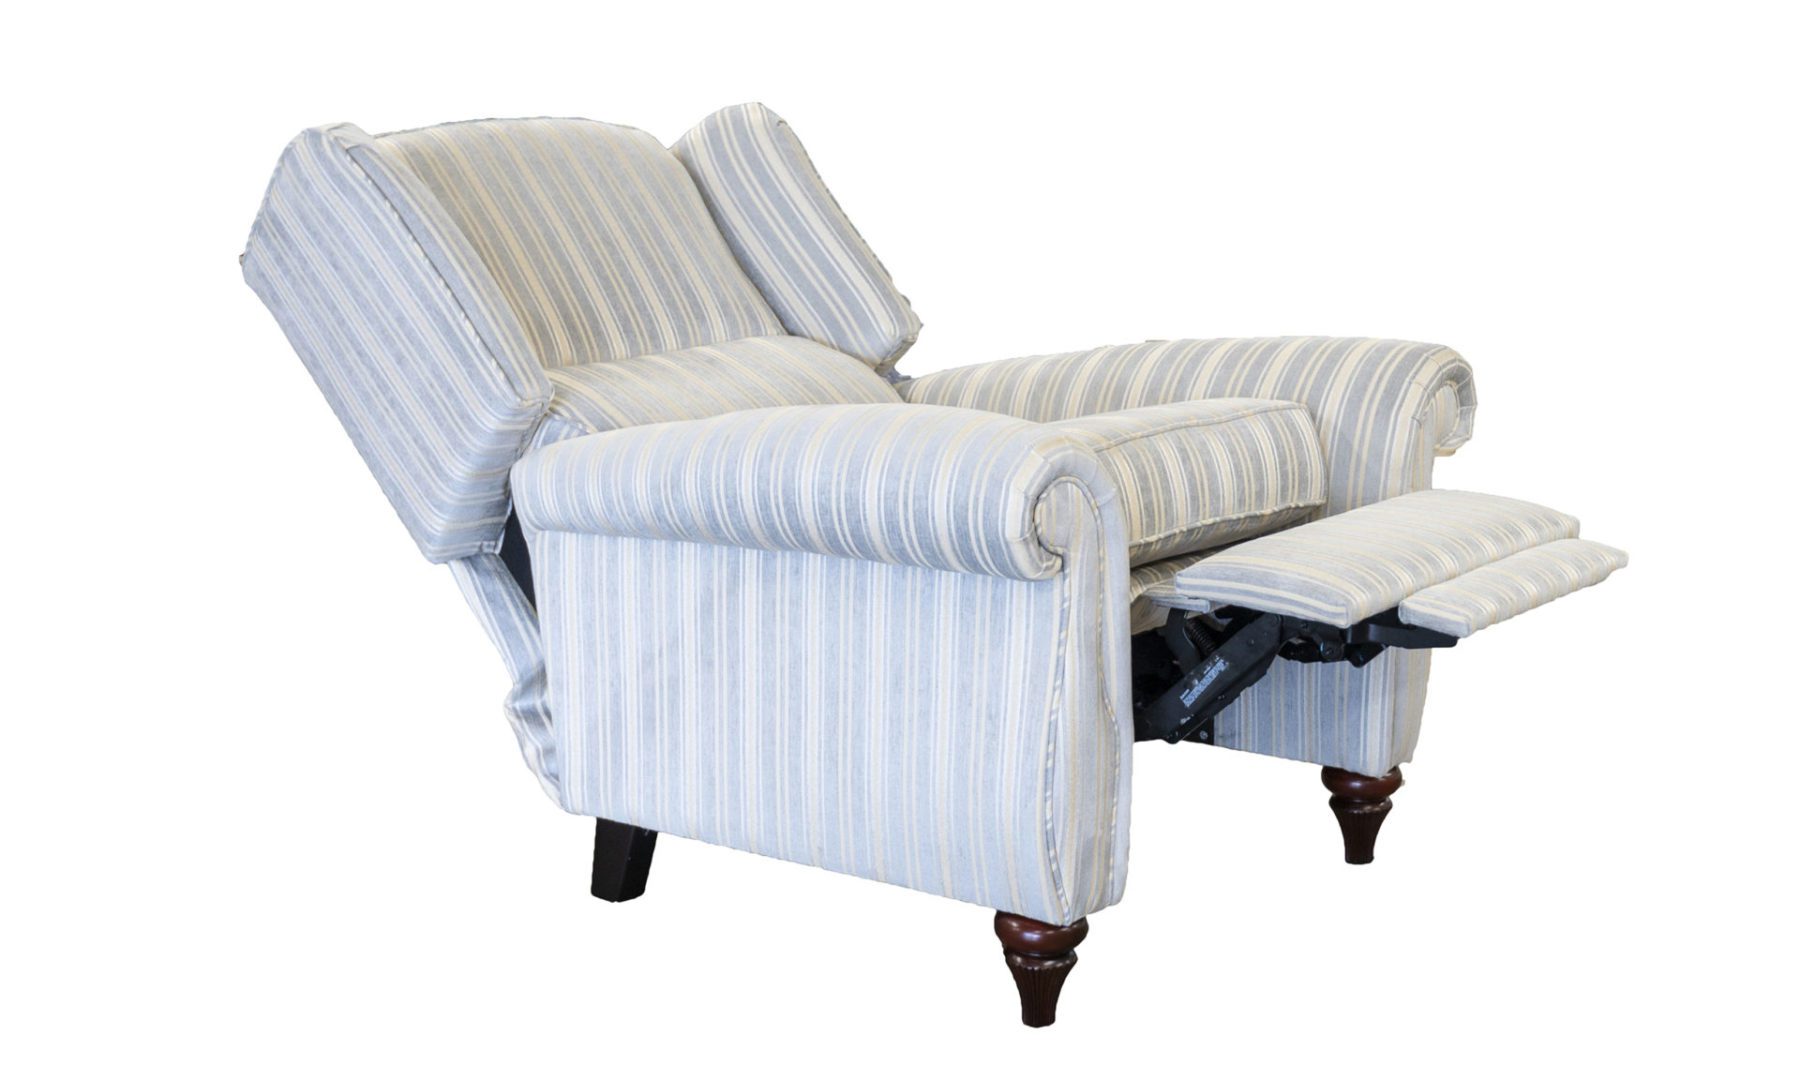 Greville Recliner Chair in Tolstoy Stripe Ocean, Platinum Collection Fabric